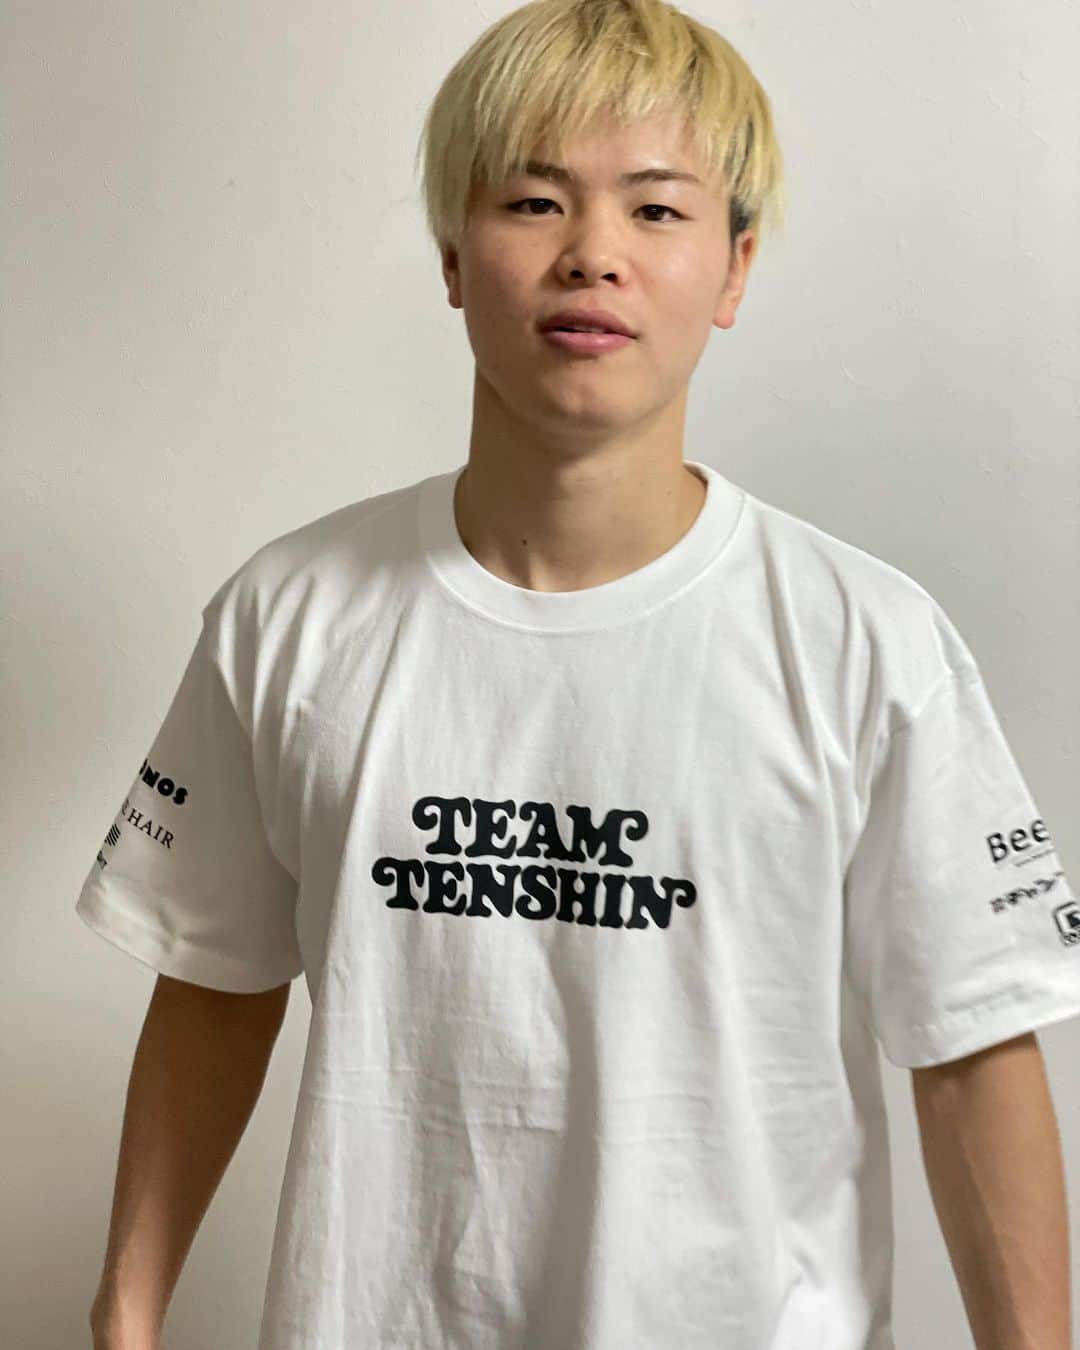 TEAM TENSHIN WASTED YOUTH Tee 2XL - Tシャツ/カットソー(半袖/袖なし)